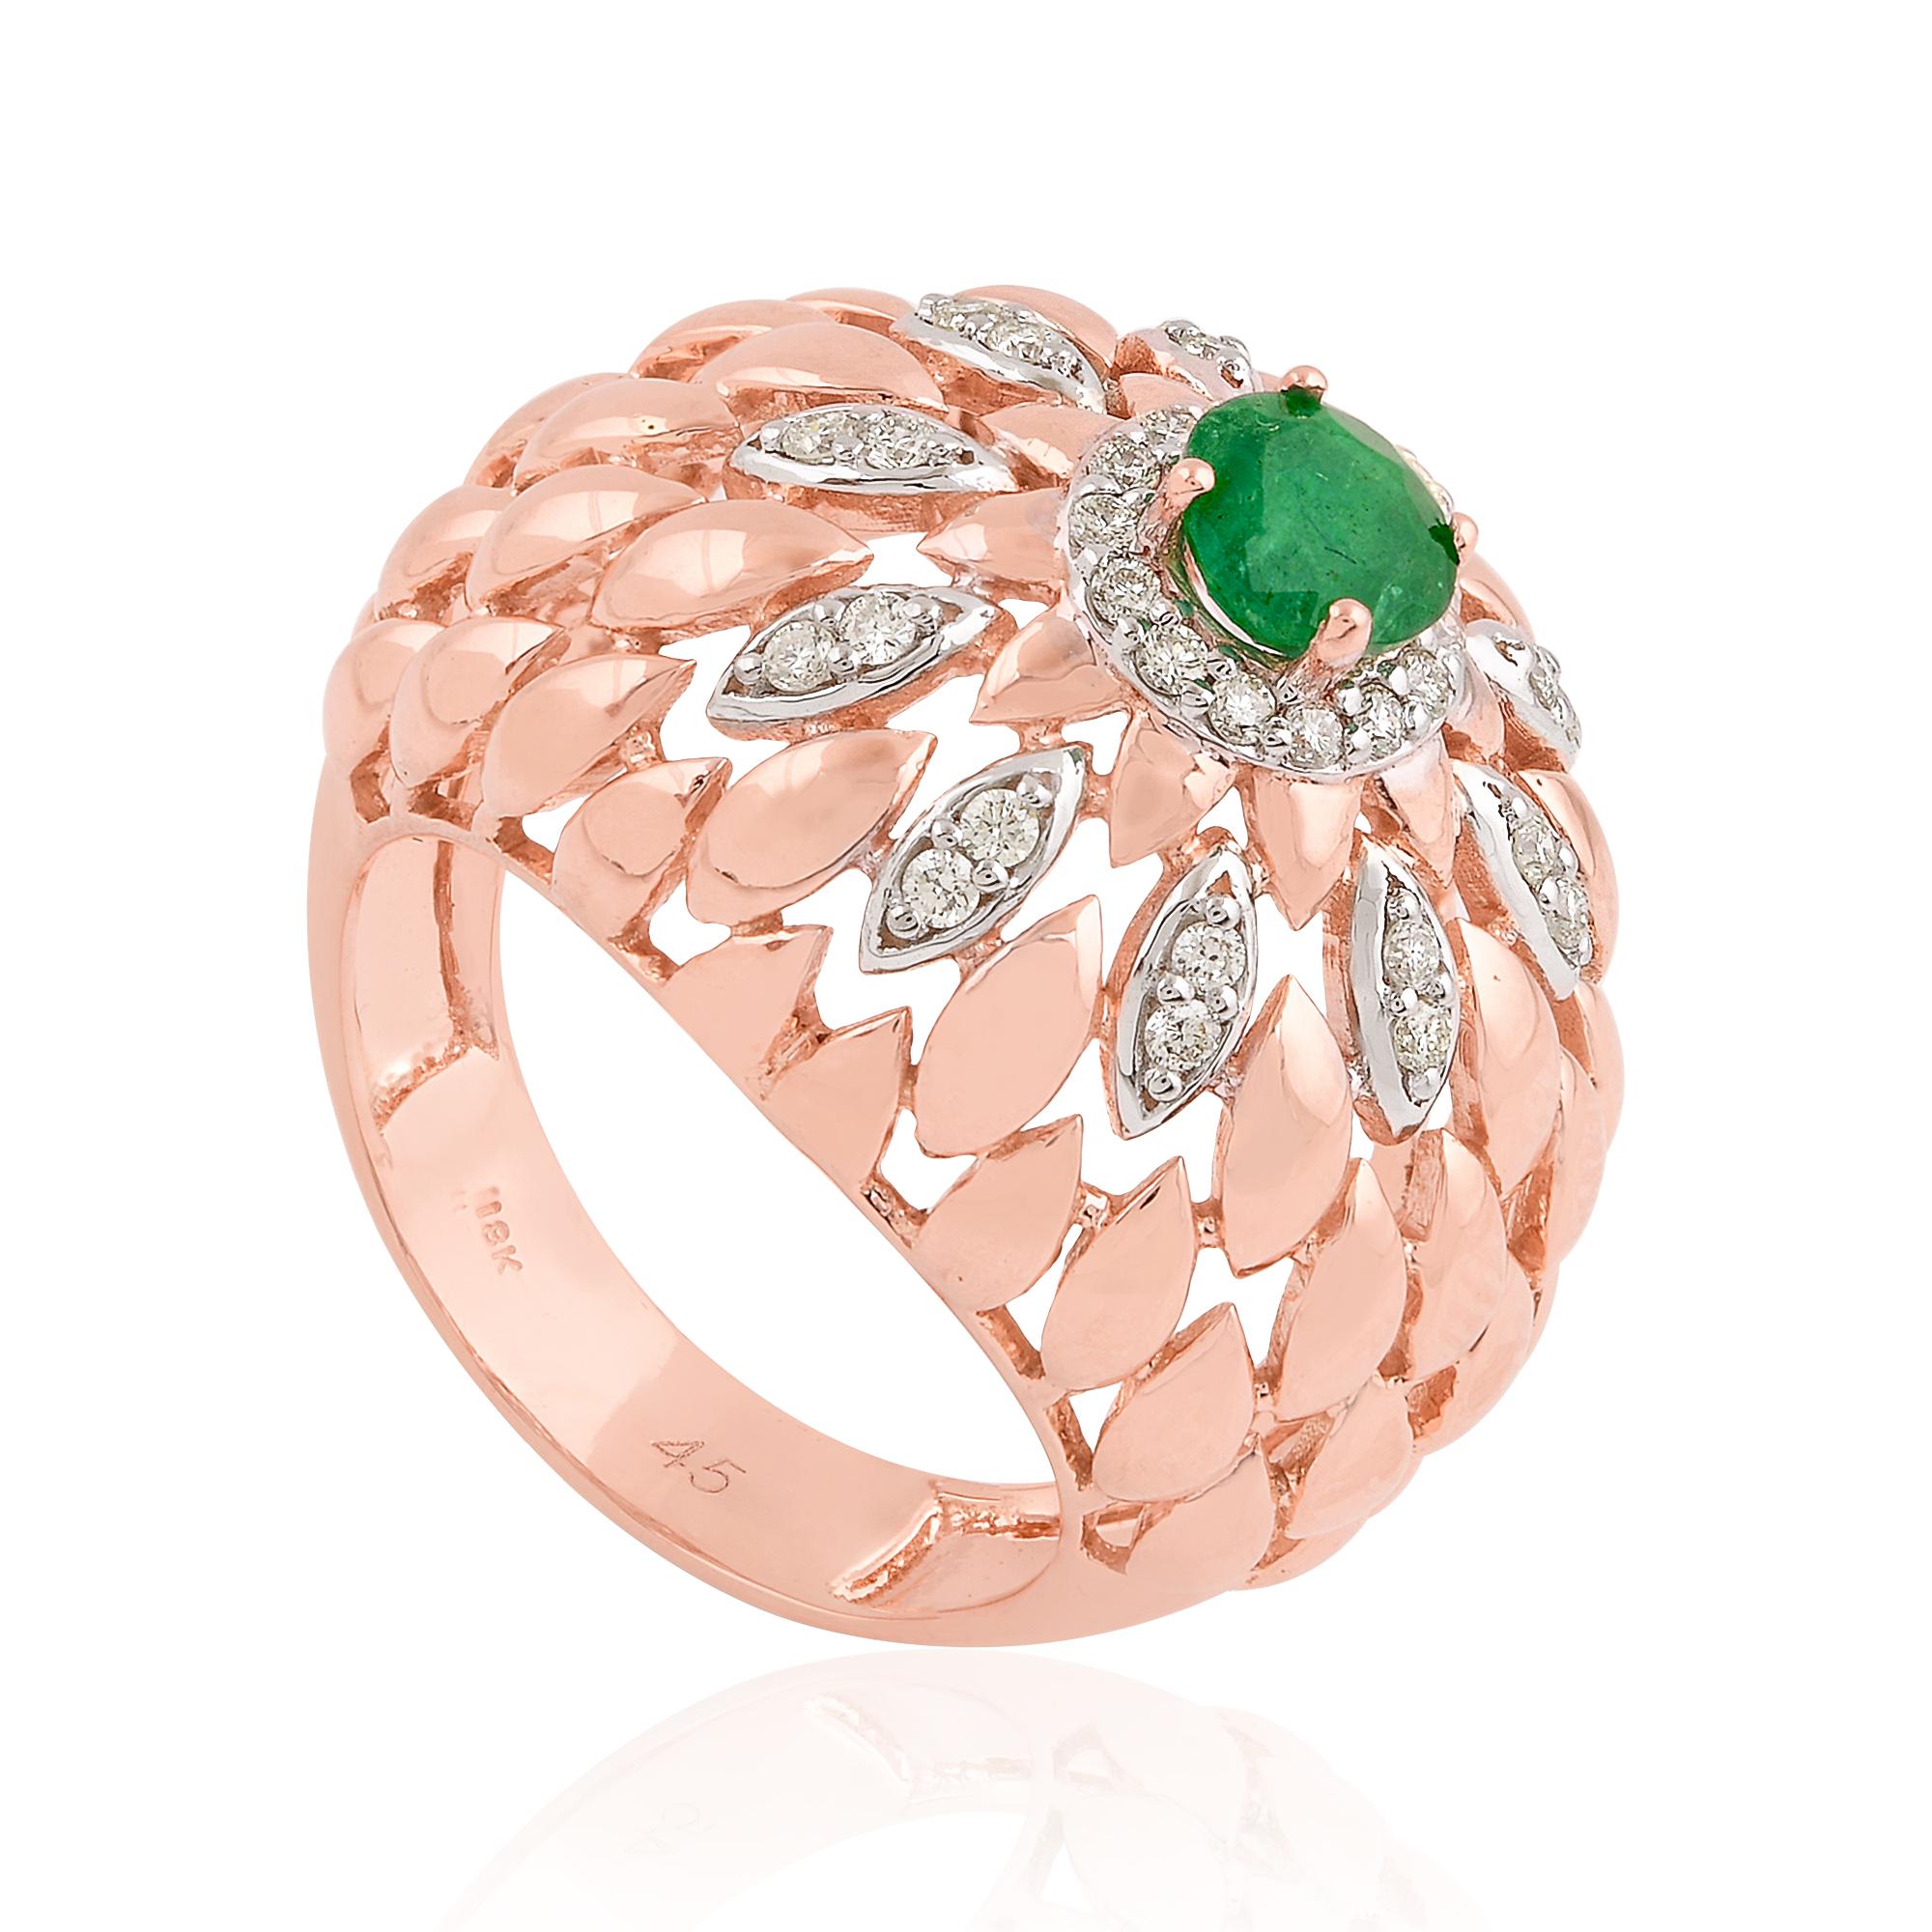 For Sale:  Natural Emerald Gemstone Dome Ring Diamond Pave Solid 18k Rose Gold Fine Jewelry 2